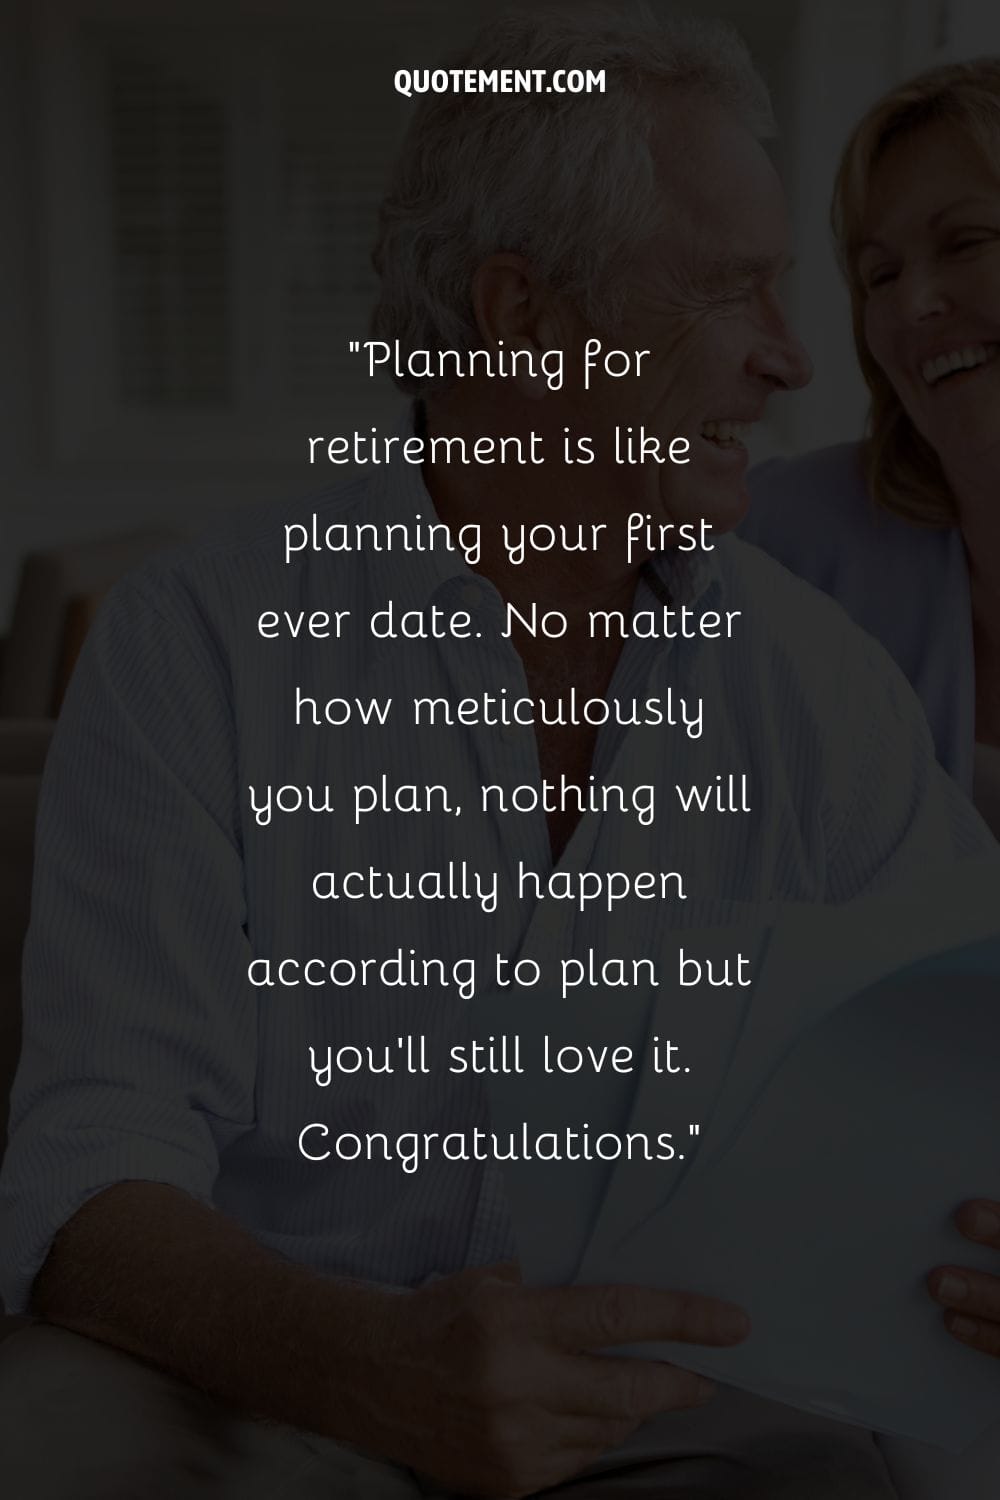 Retired couple, forever young at heart representing joke funny retirement quote